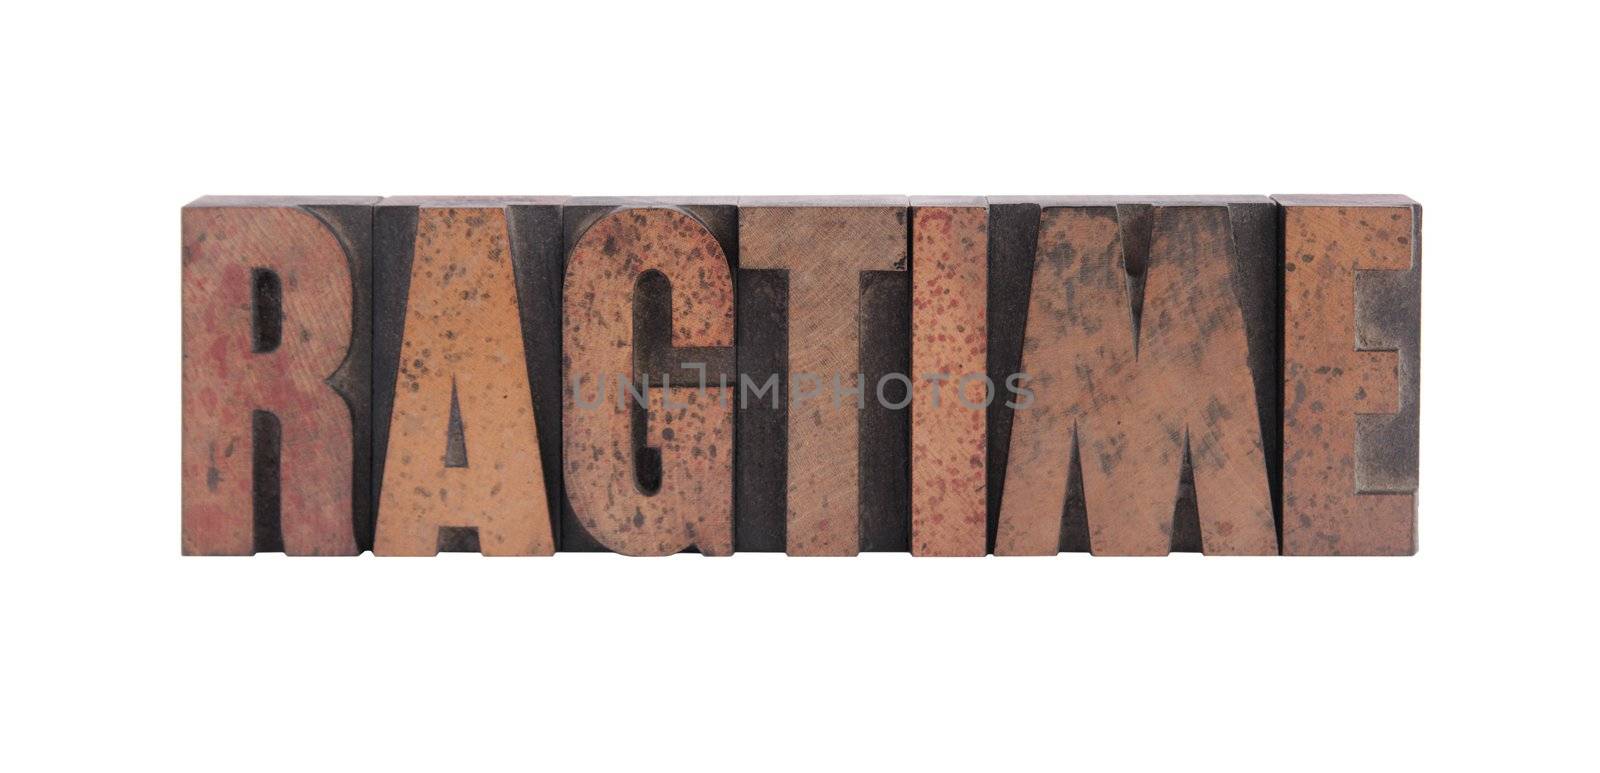 the word 'ragtime' in old, ink-stained wood type